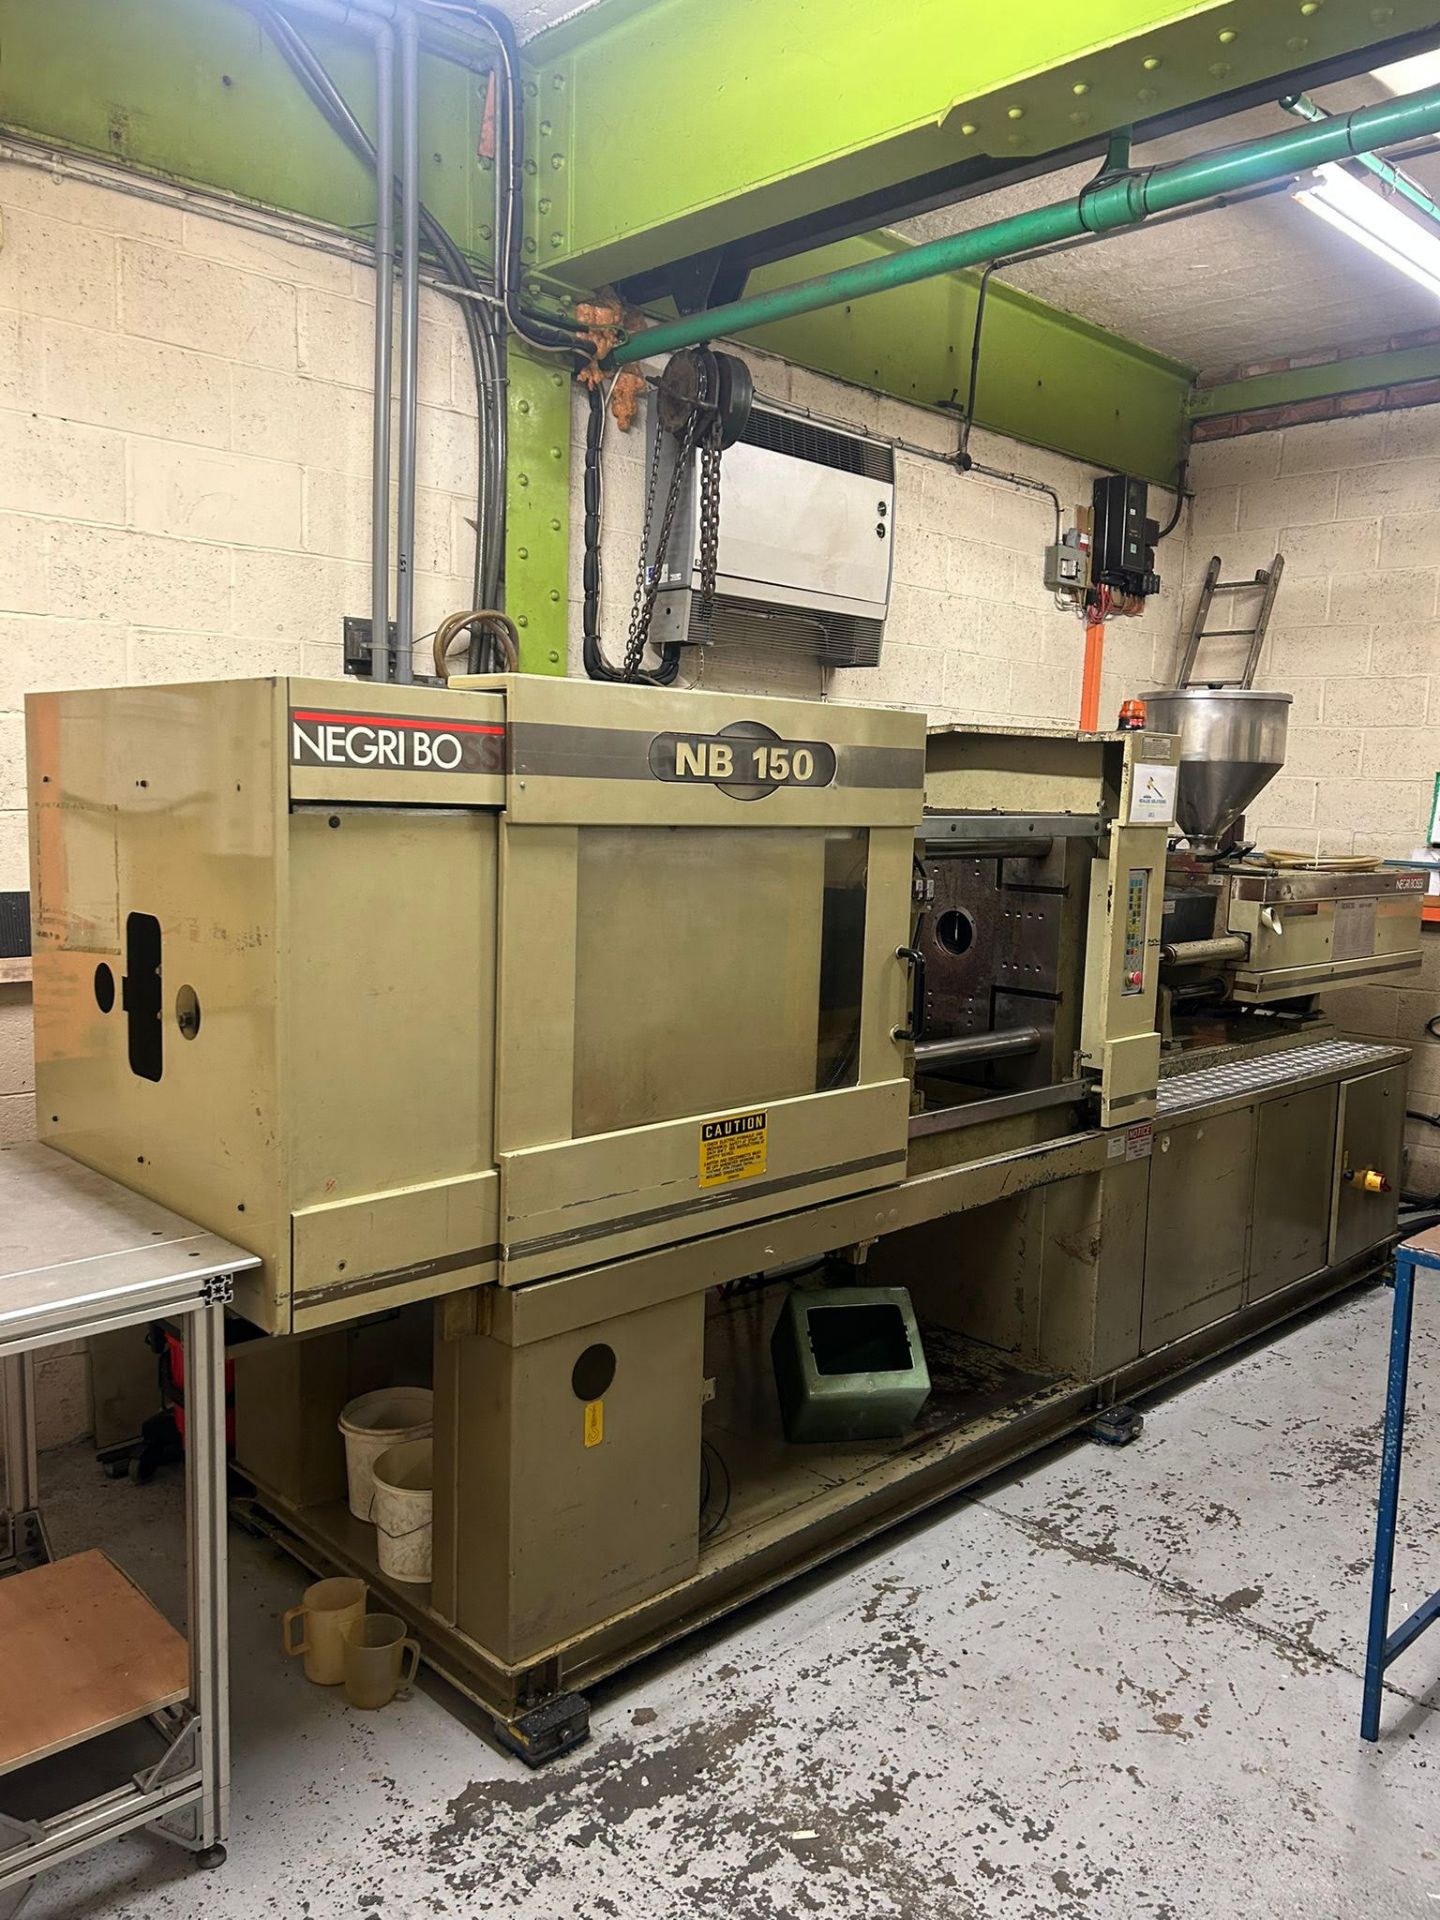 Negri Bossi NB150 injection moulding machine to include Dimigraphic display and TEW attachment